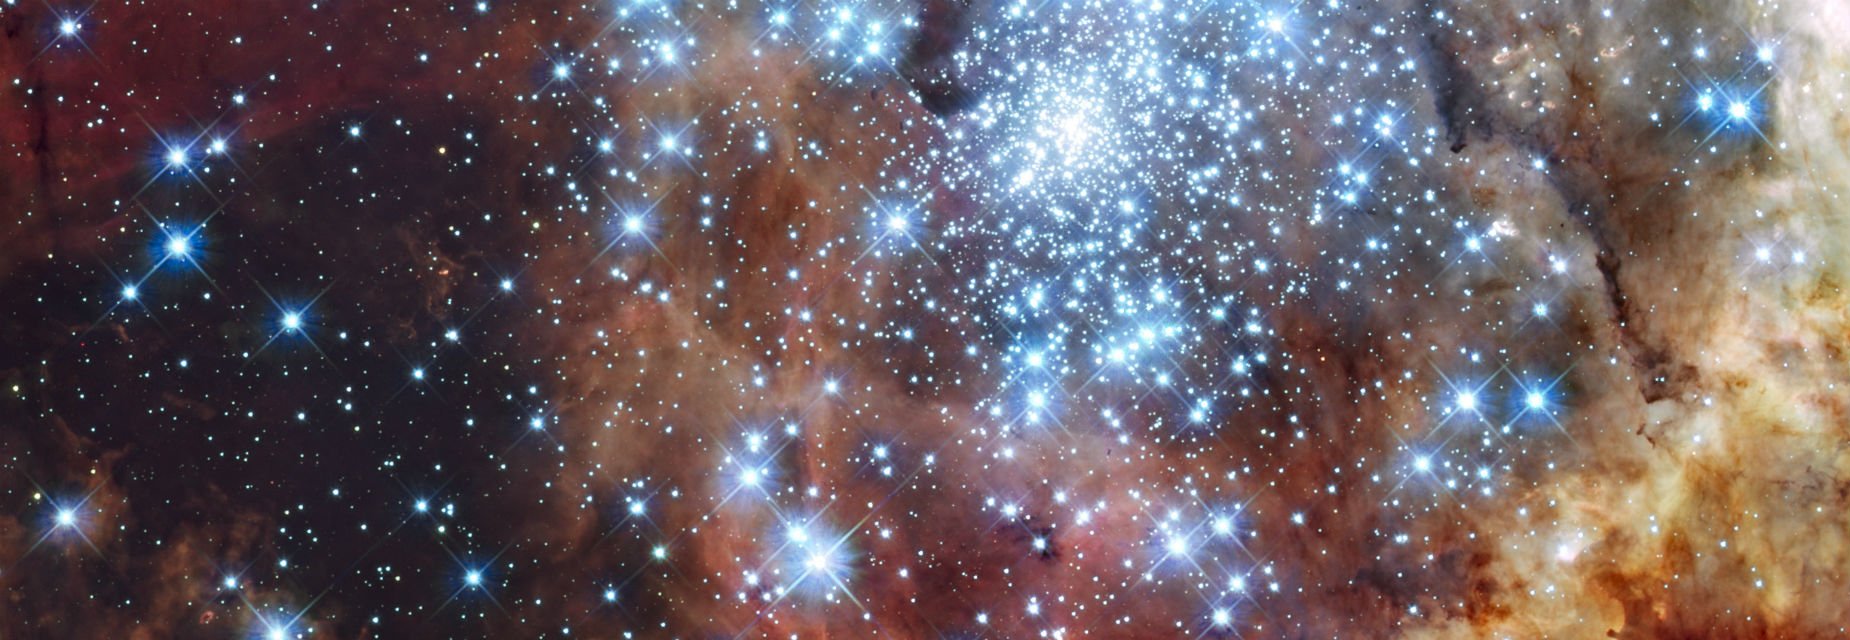 NASA image taken by the Hubble telescope of two star clusters